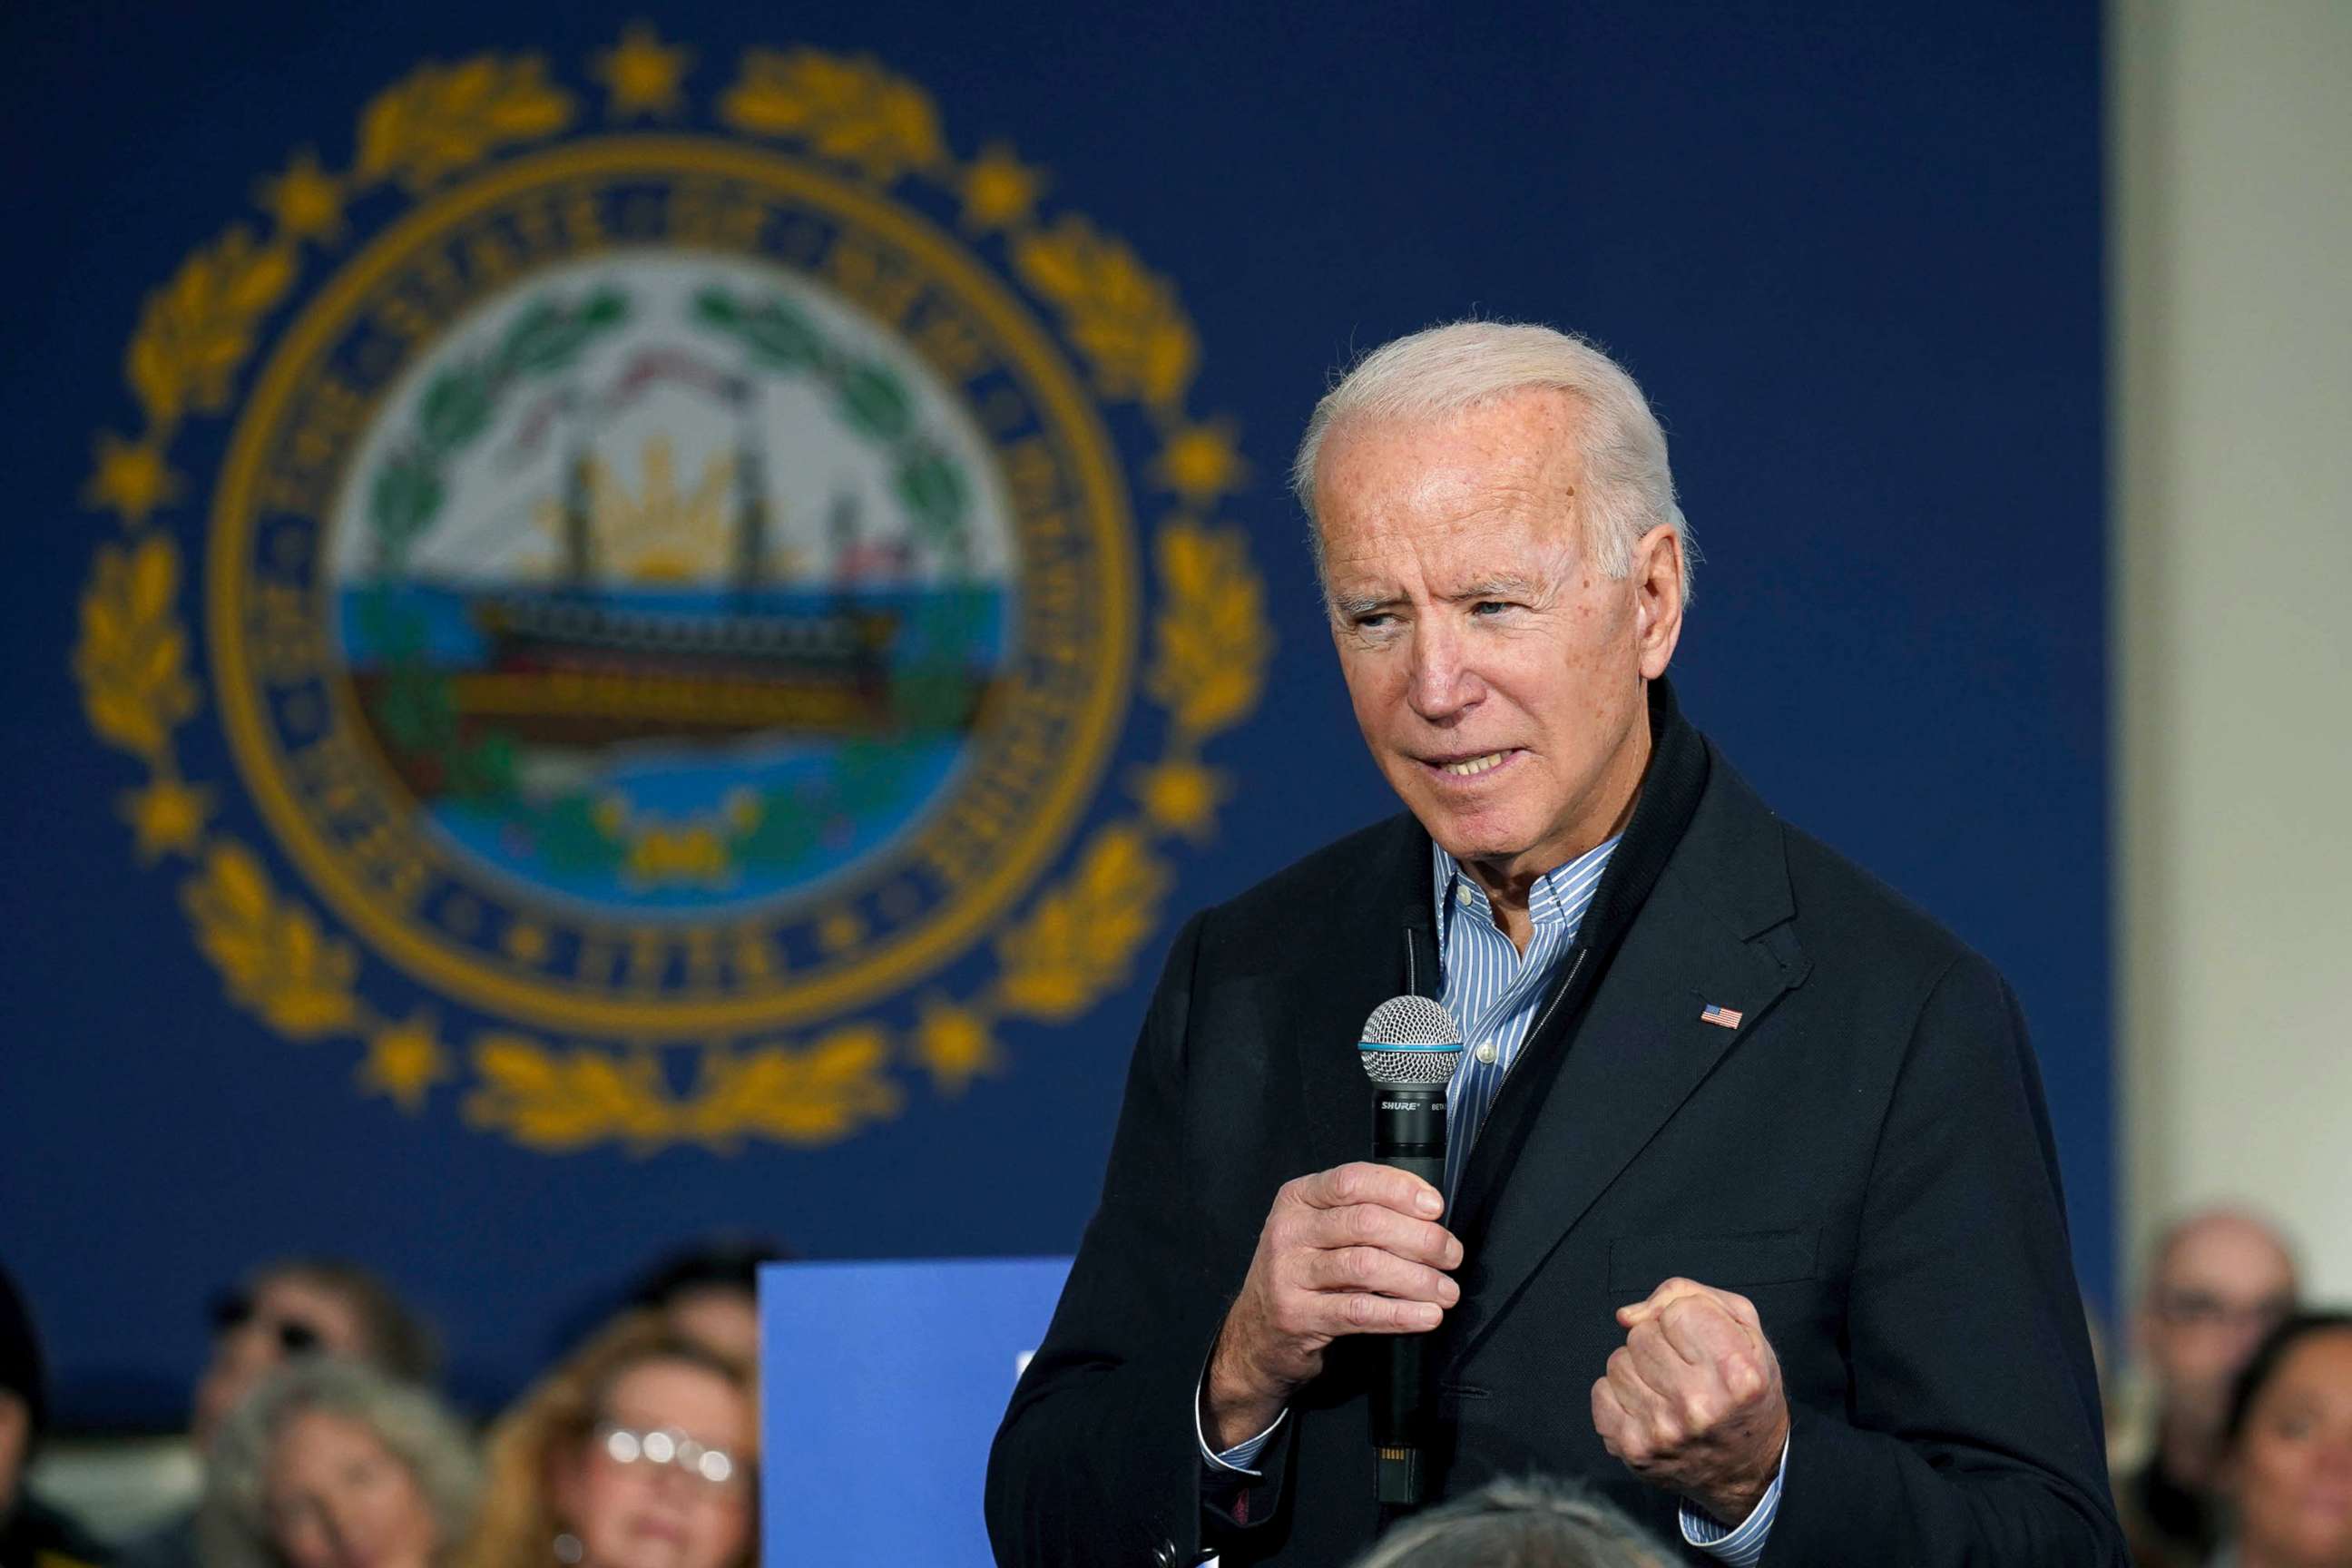 PHOTO: Democratic presidential candidate former Vice President Joe Biden pumps his fist as he speaks during a campaign event, Dec. 29, 2019, in Peterborough, N.H.